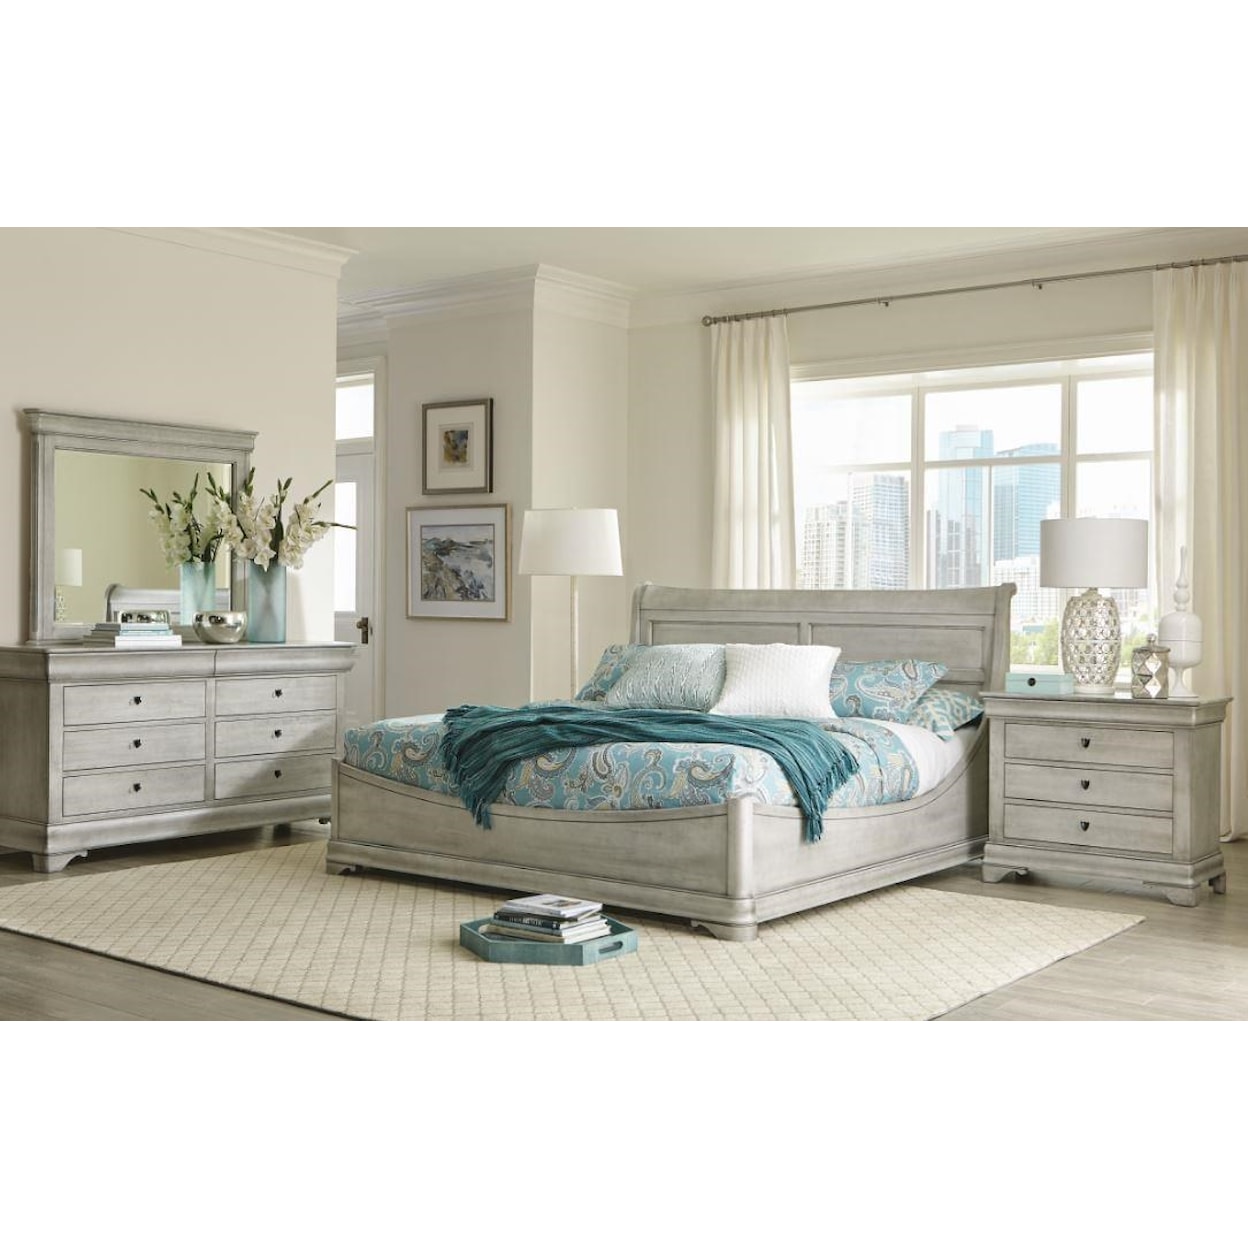 Durham Chateau Fontaine King Euro Bed